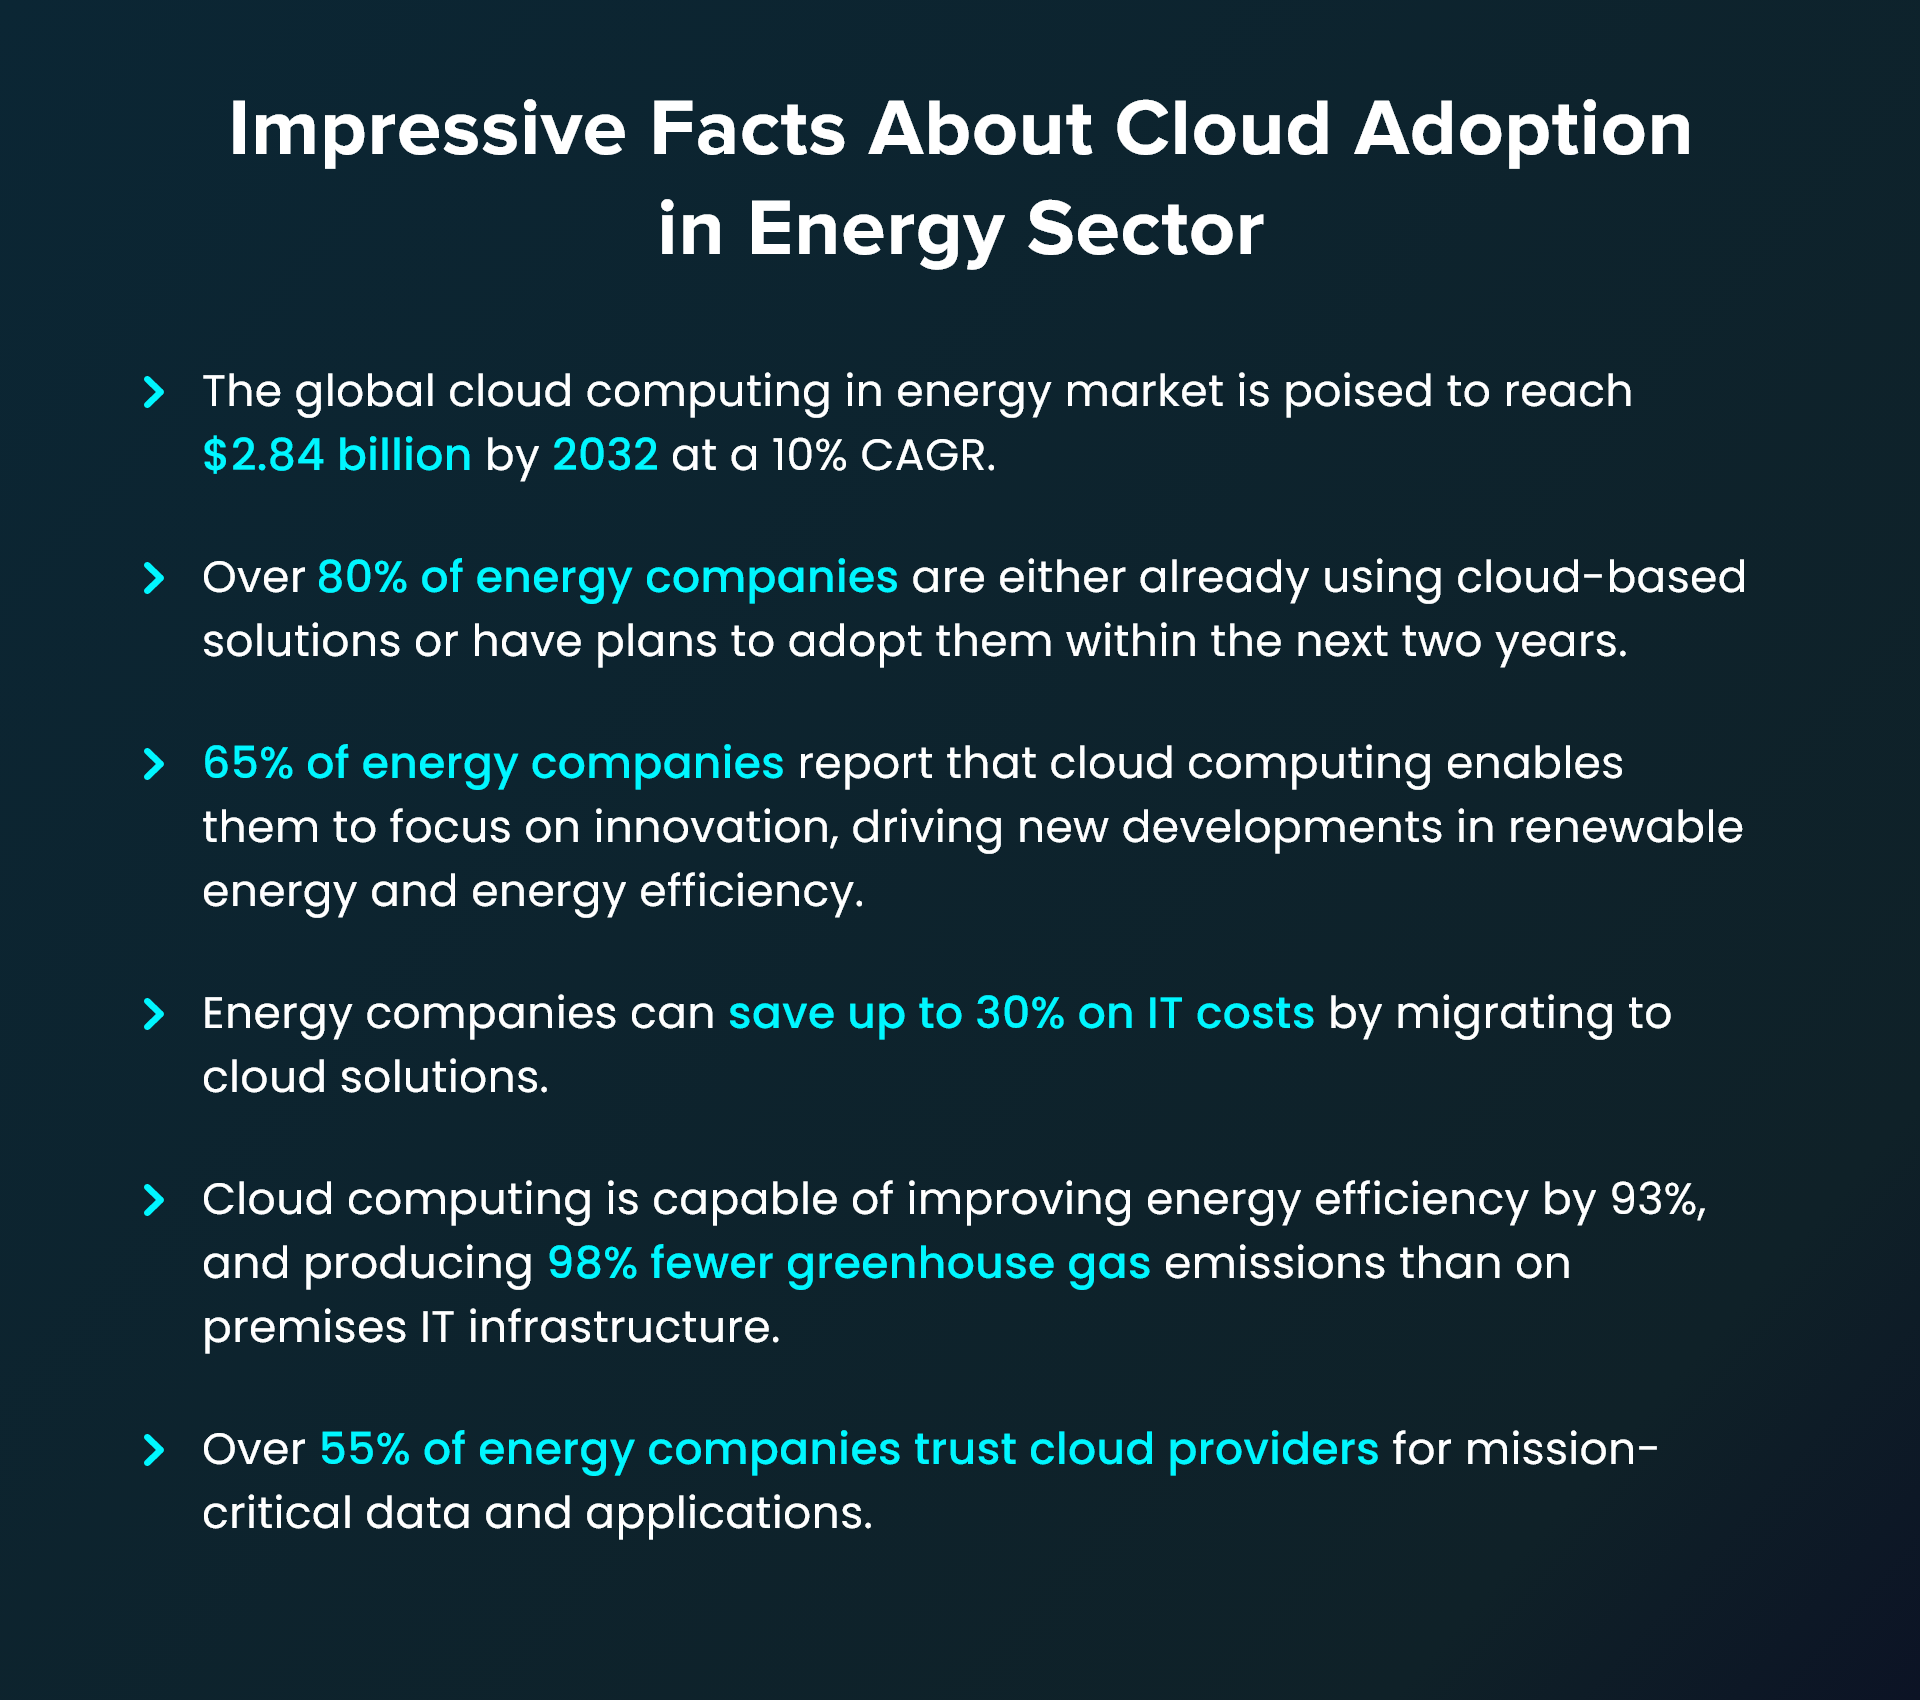 Key benefits of cloud in energy sector